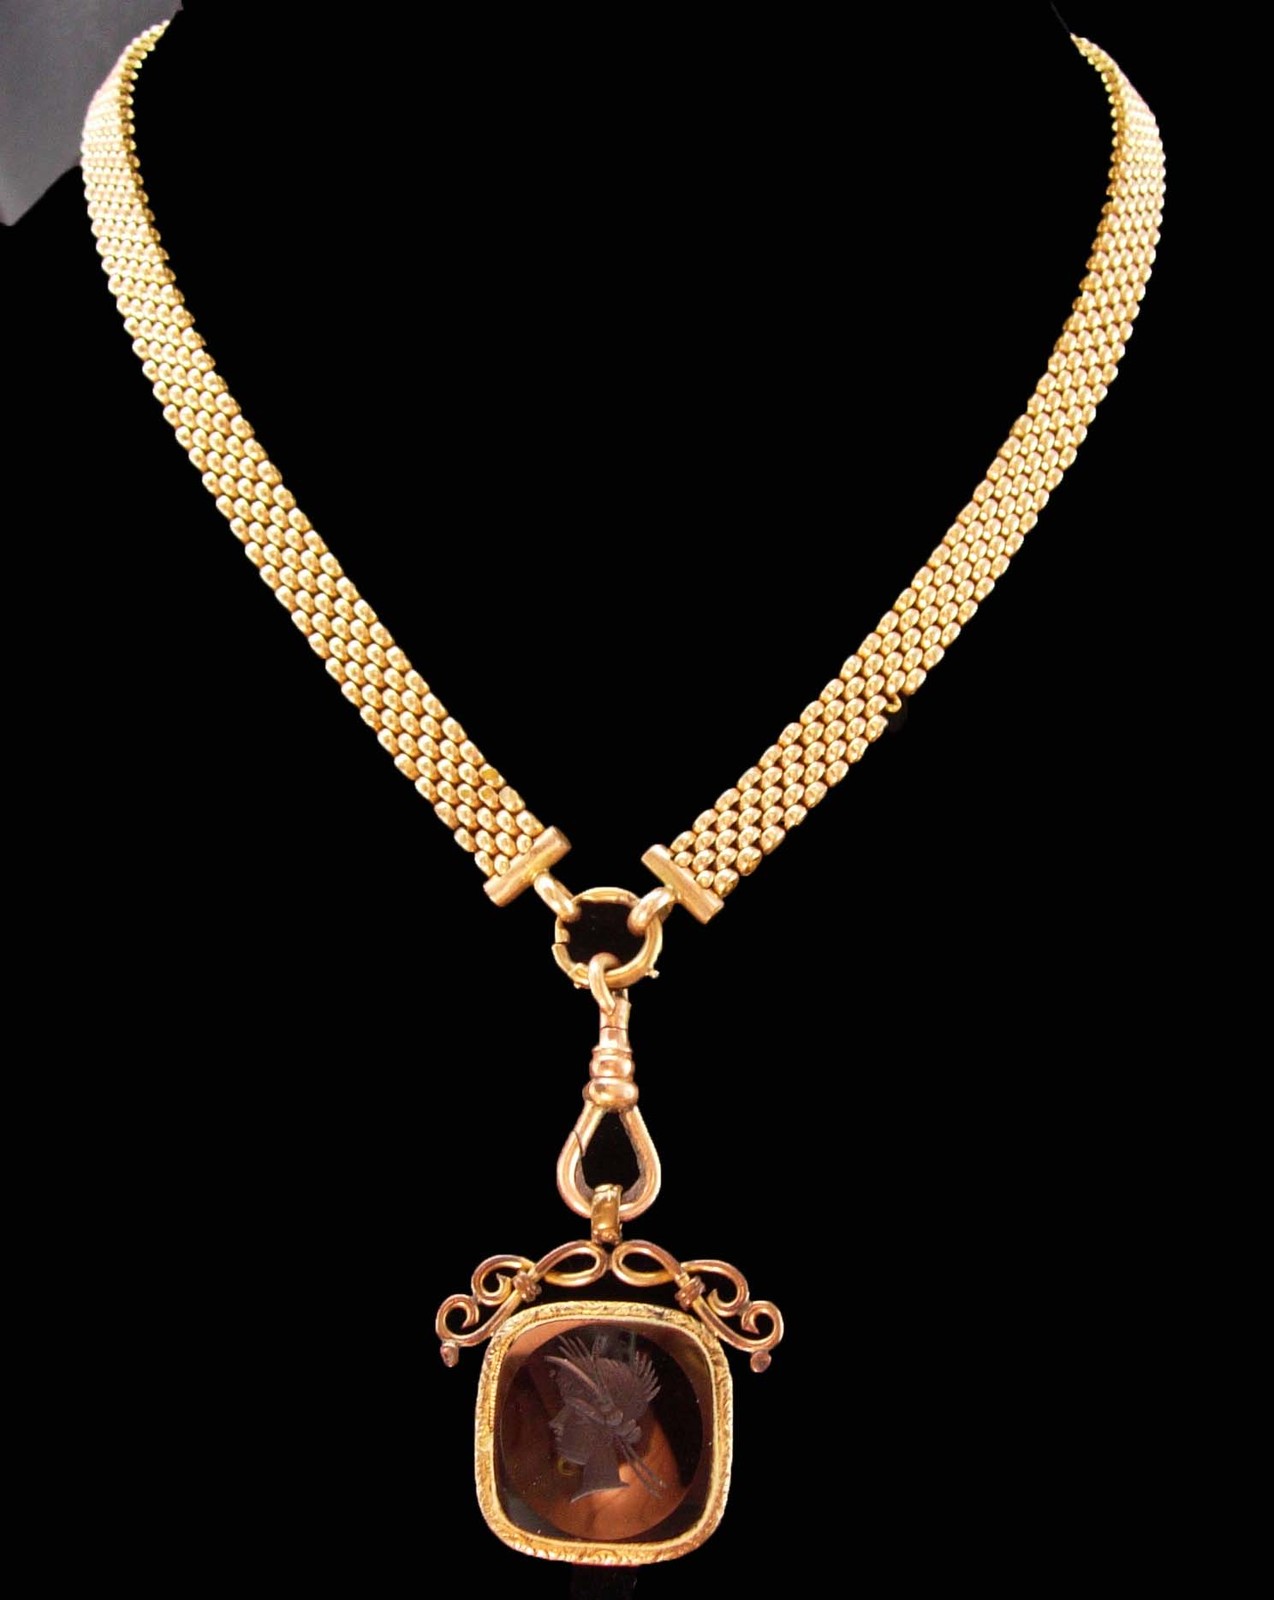 Primary image for Antique Victorian intaglio Fob necklace - Pocketwatch wide chain - antique centu